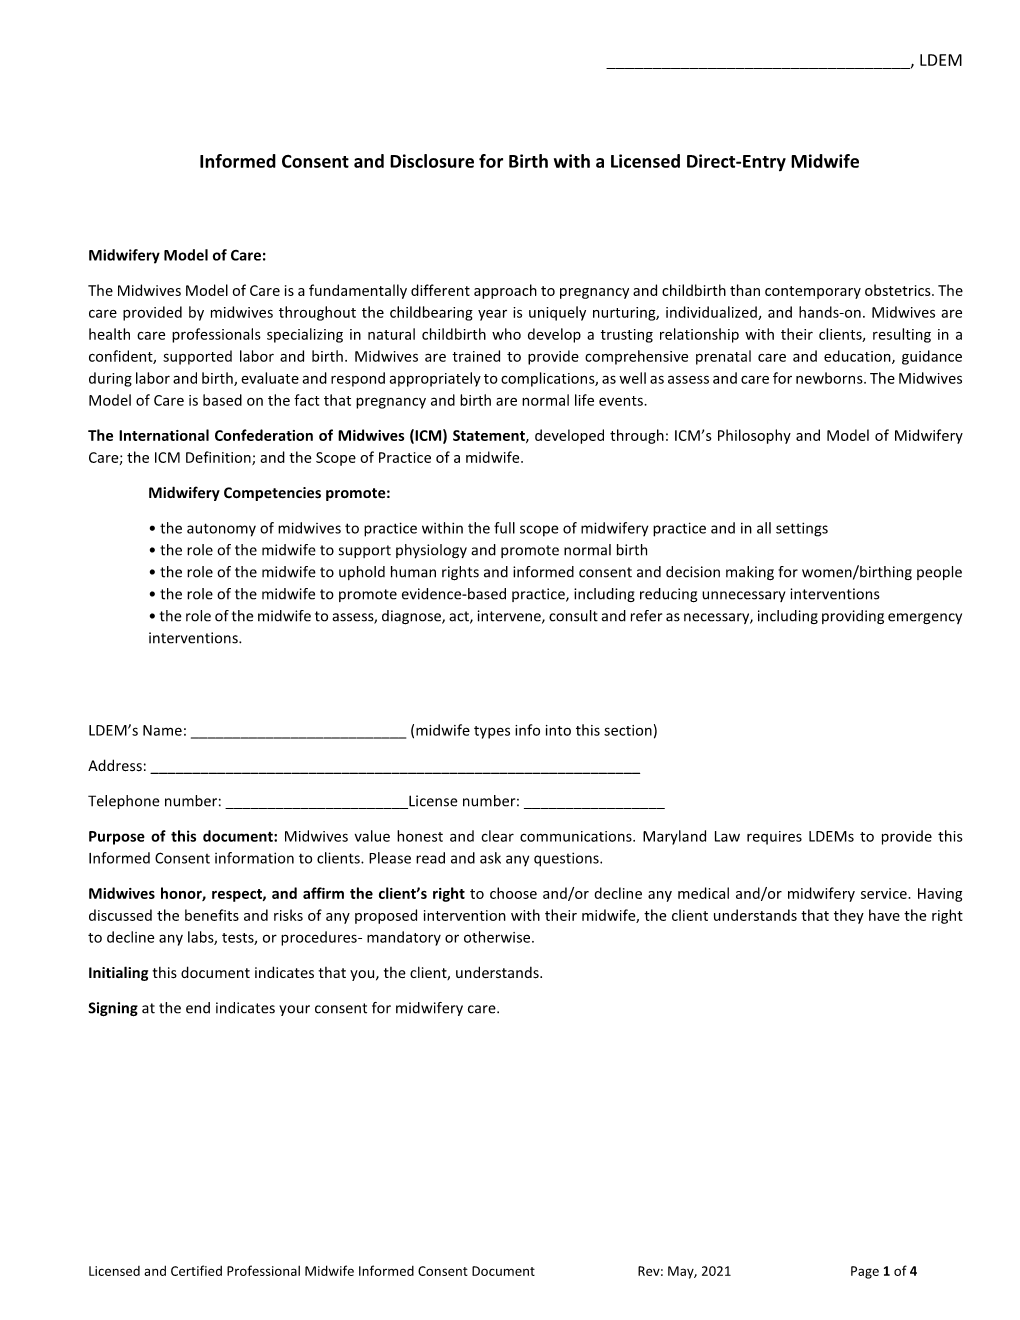 Informed Consent and Disclosure for Birth with a Licensed Direct-Entry Midwife